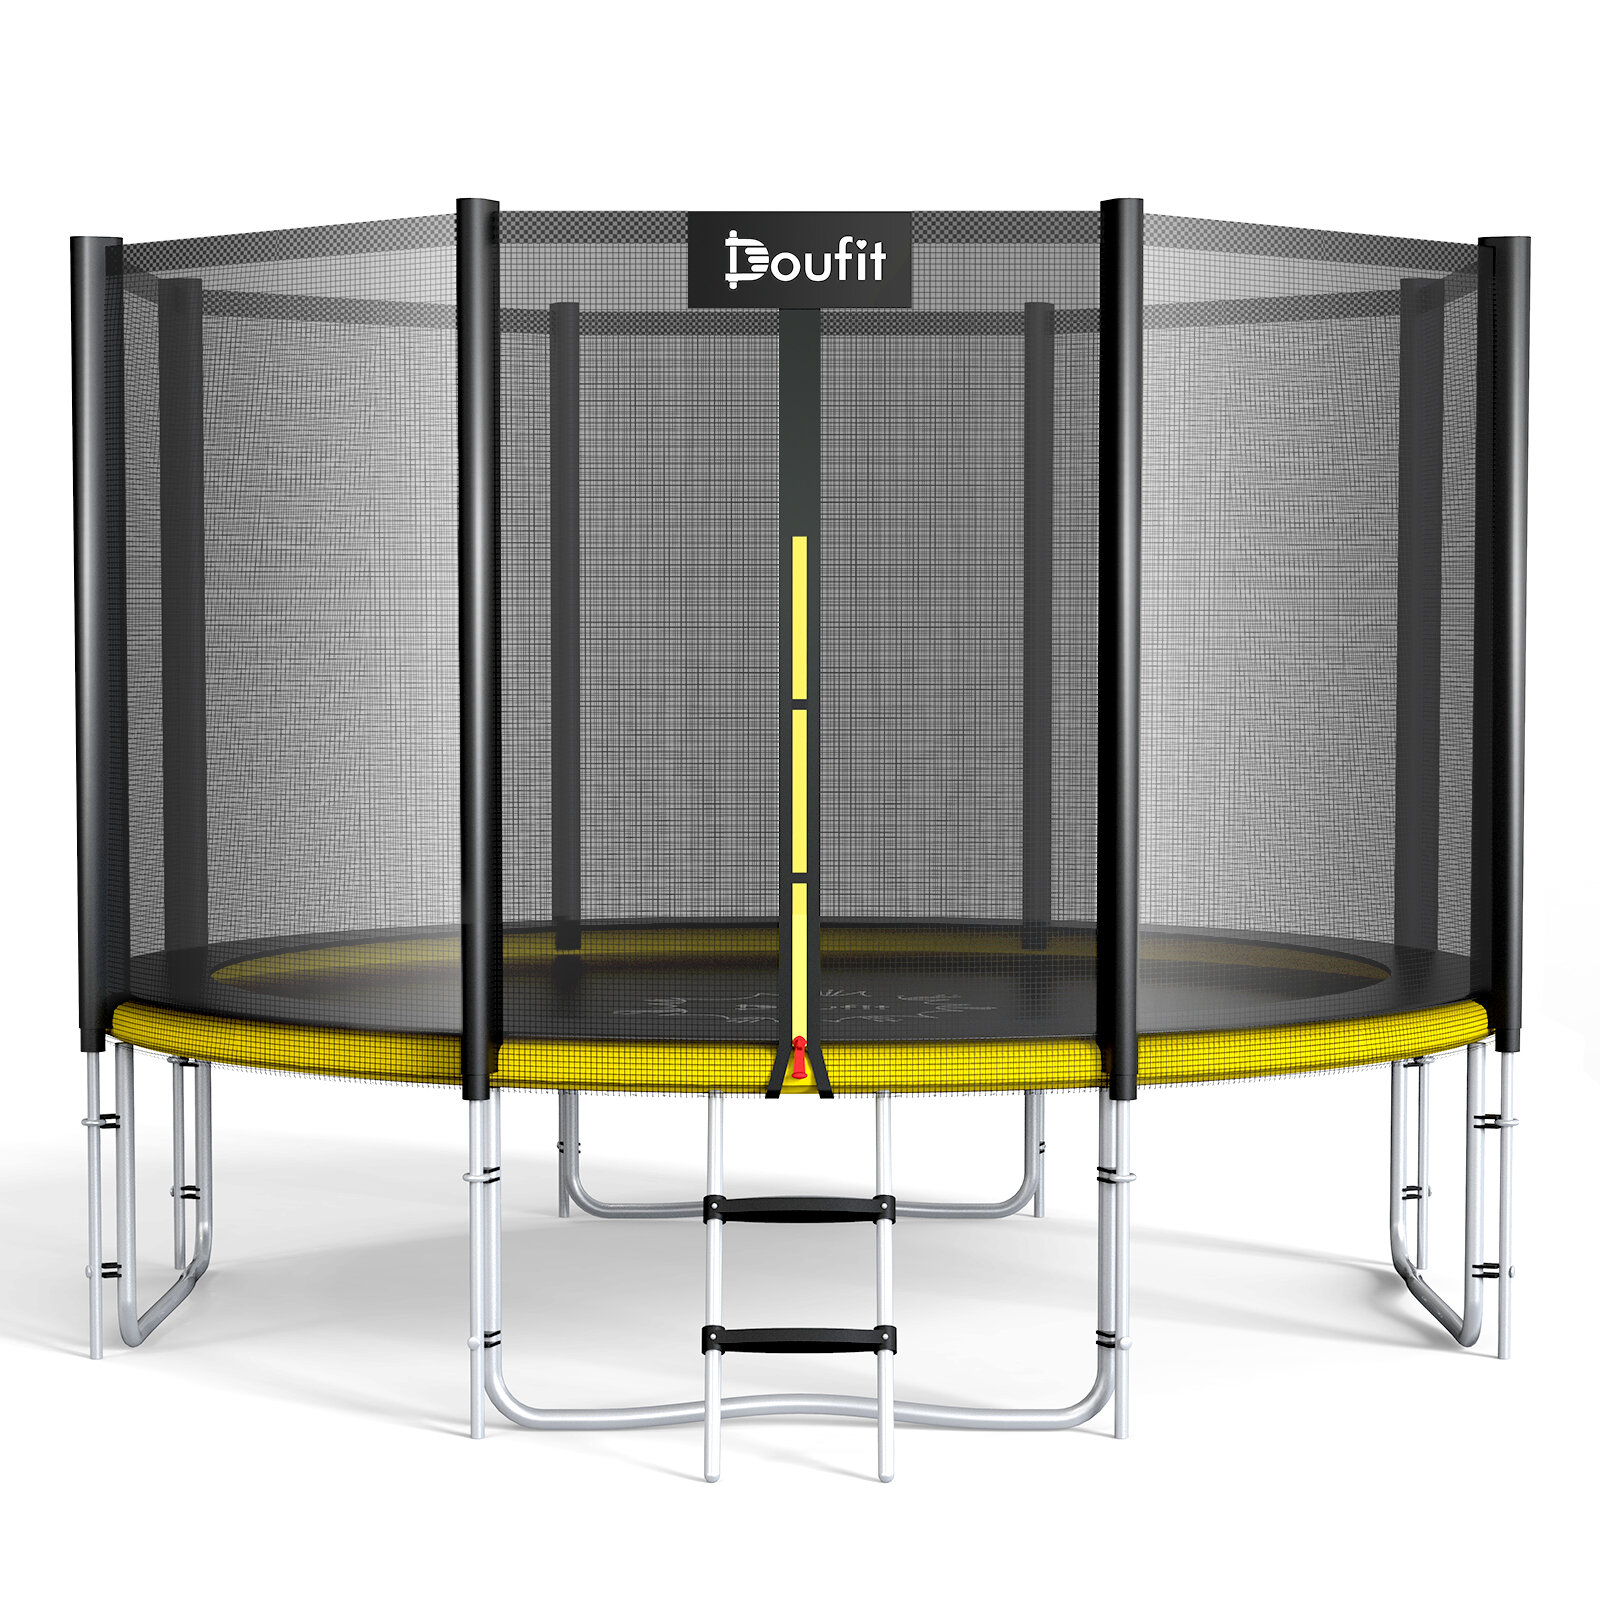 Image of Doufit TR-07 Ø366cm 12FT Trampoline 200kg Capacity with Safety Enclosure Net Outdoor Durable Recreational Trampolines fo